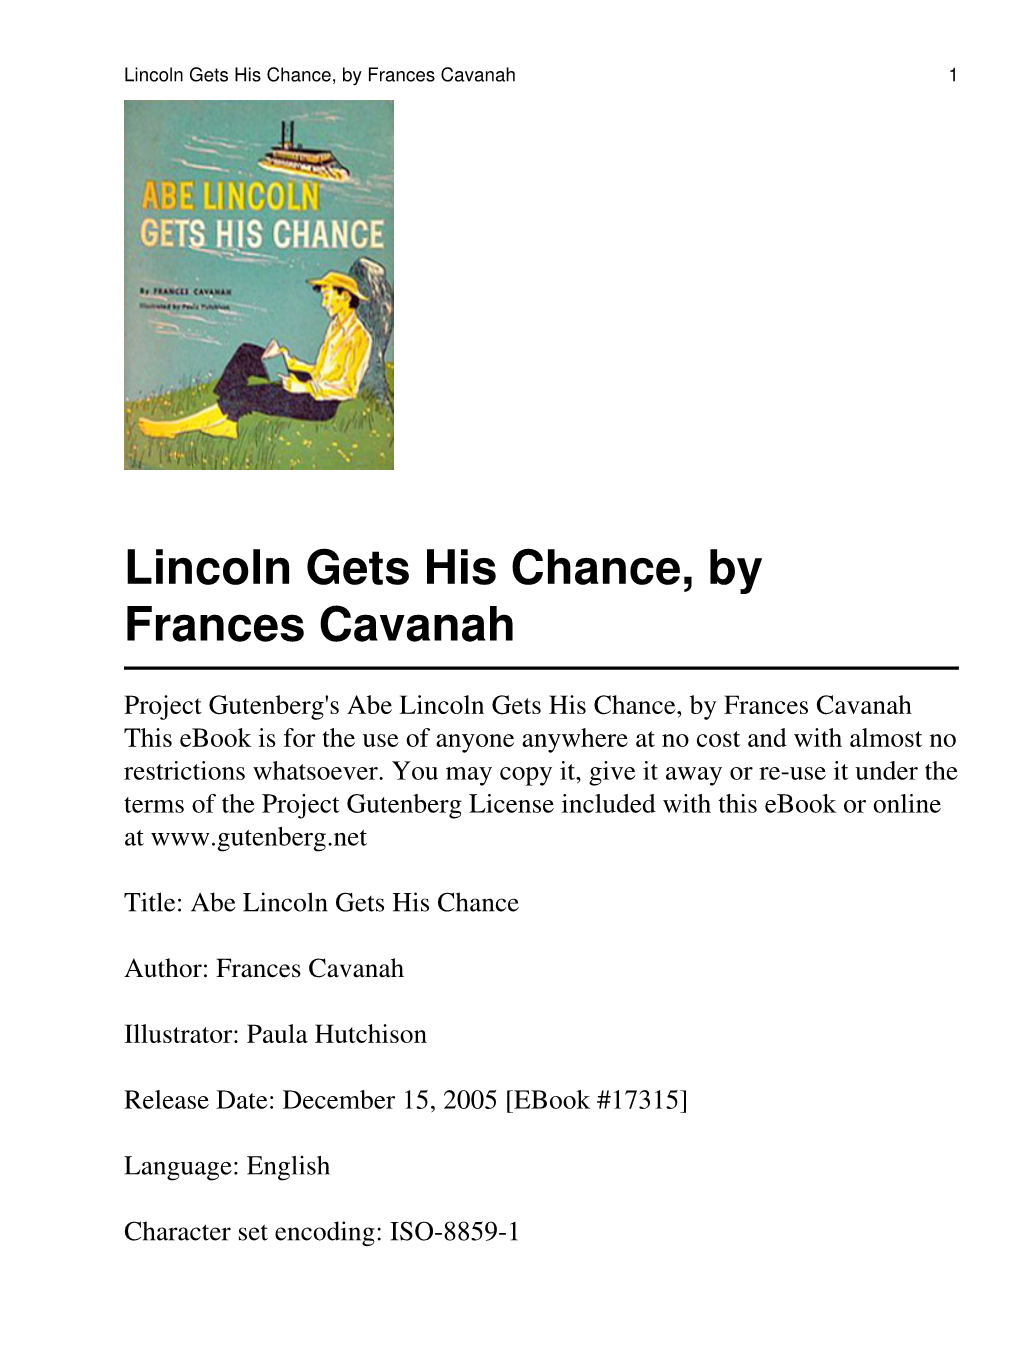 Abe Lincoln Gets His Chance, by Frances Cavanah This Ebook Is for the Use of Anyone Anywhere at No Cost and with Almost No Restrictions Whatsoever